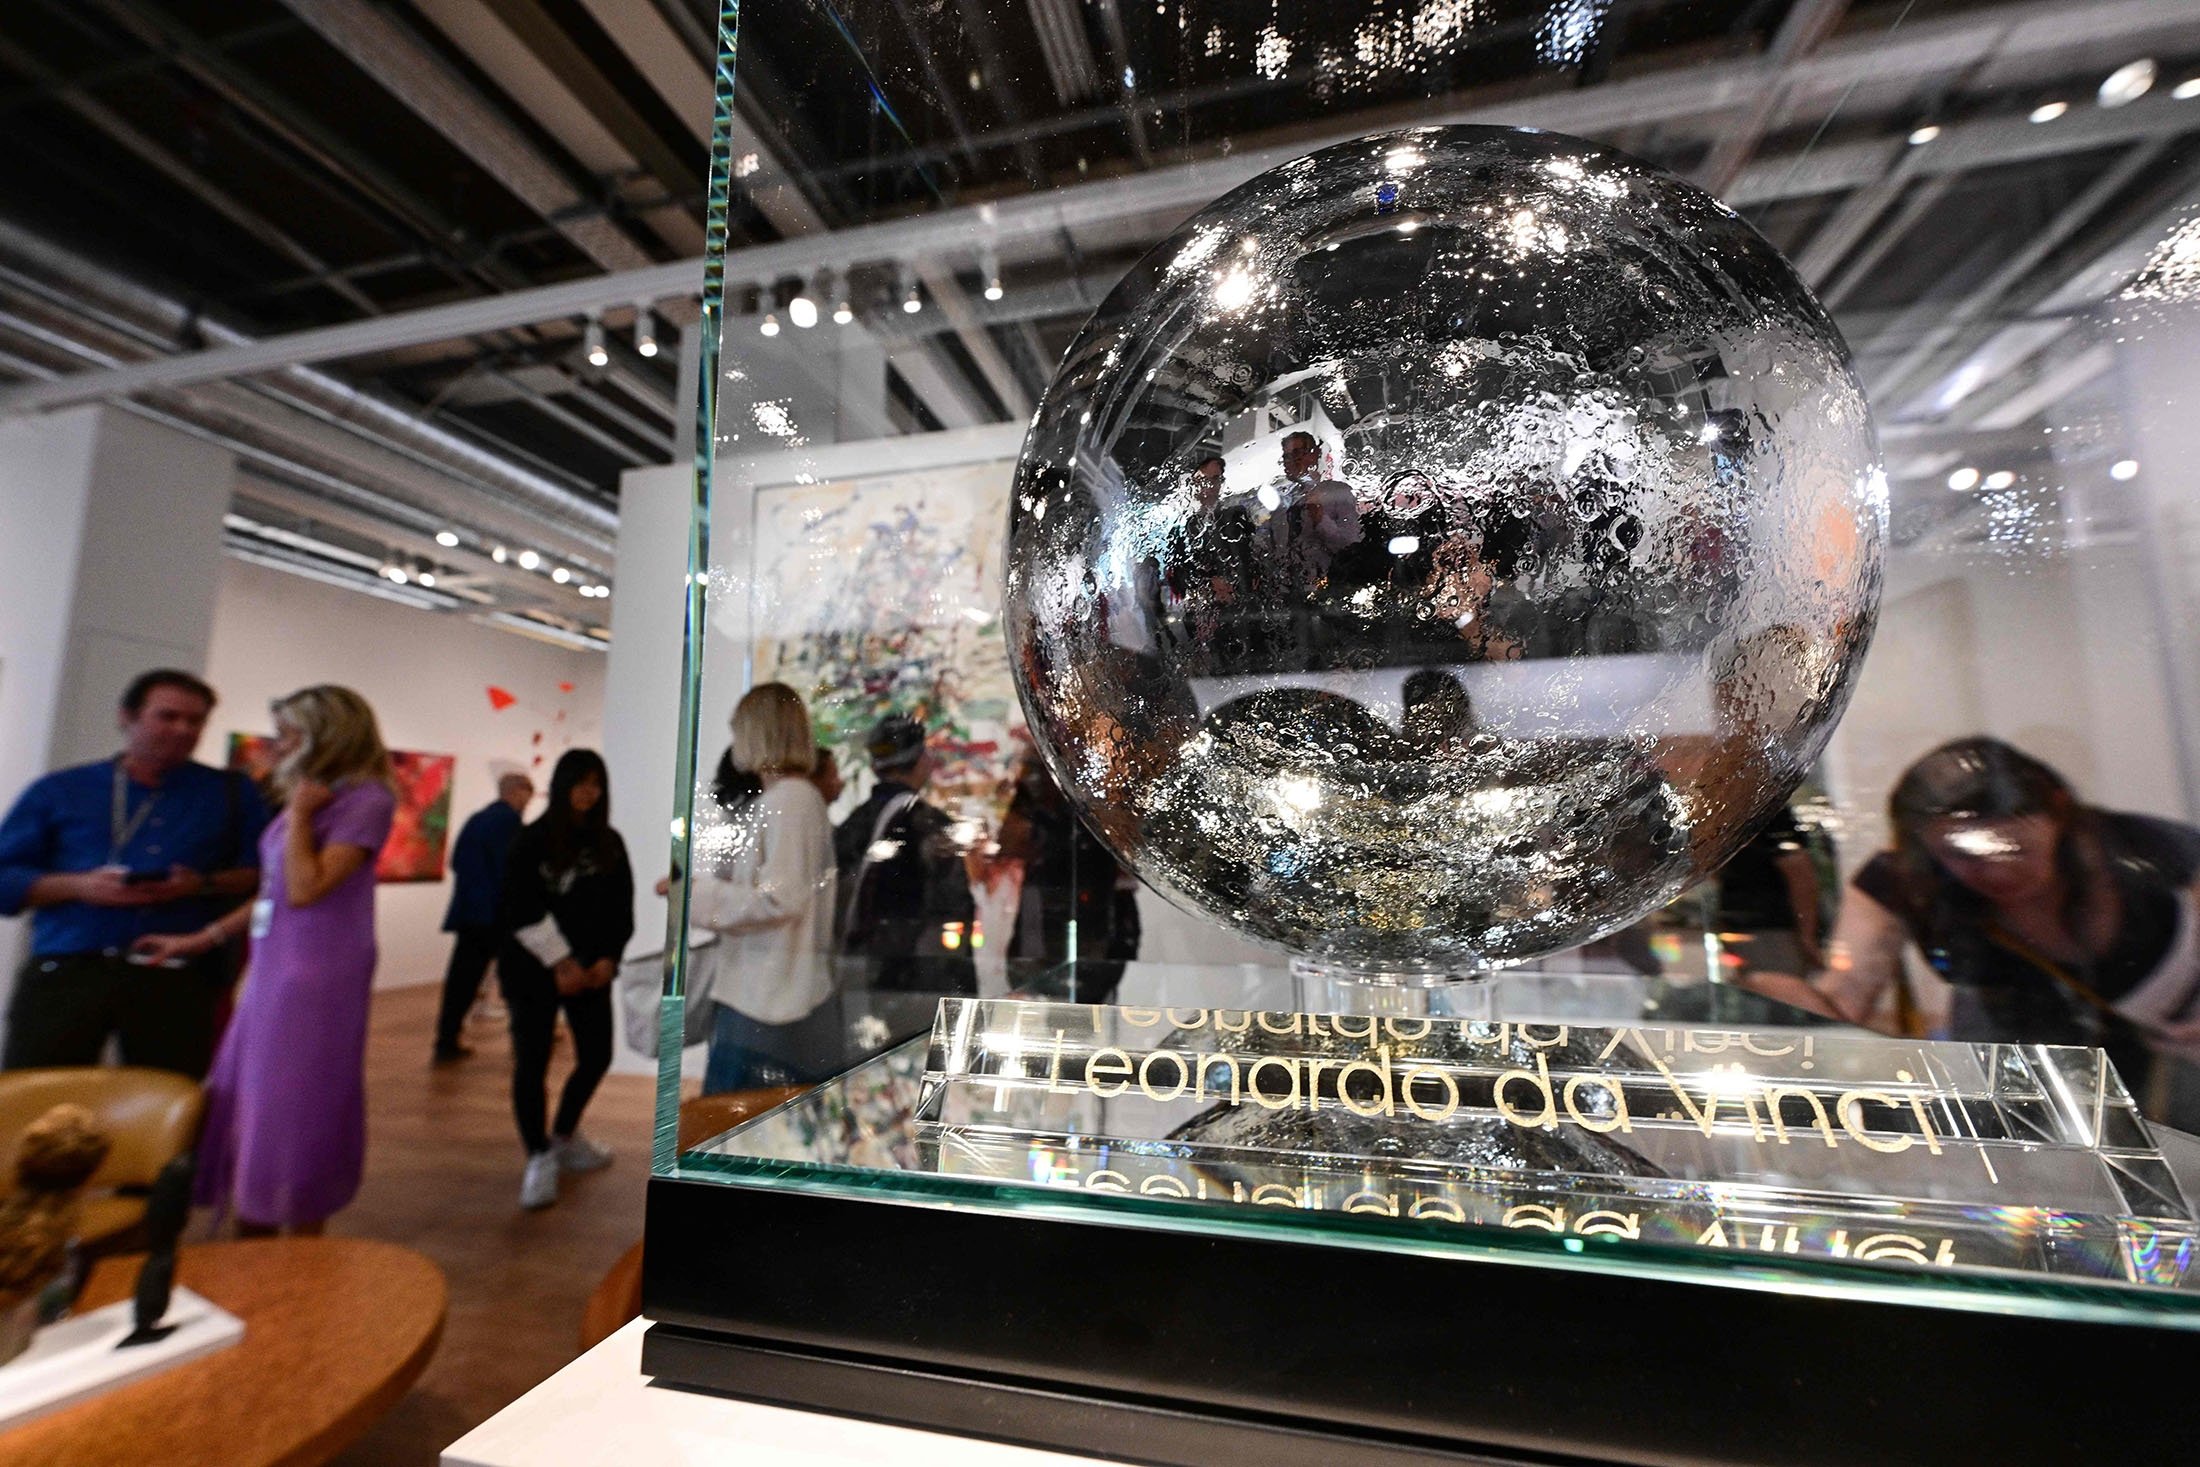 Visitors pass by a Jeff Koons artwork "moonfaces, Leonardo da Vinci" during a preview day of Art Basel, the world's premier modern and contemporary art fair in Basel, Switzerland, June 14, 2022. (AFP Photo)